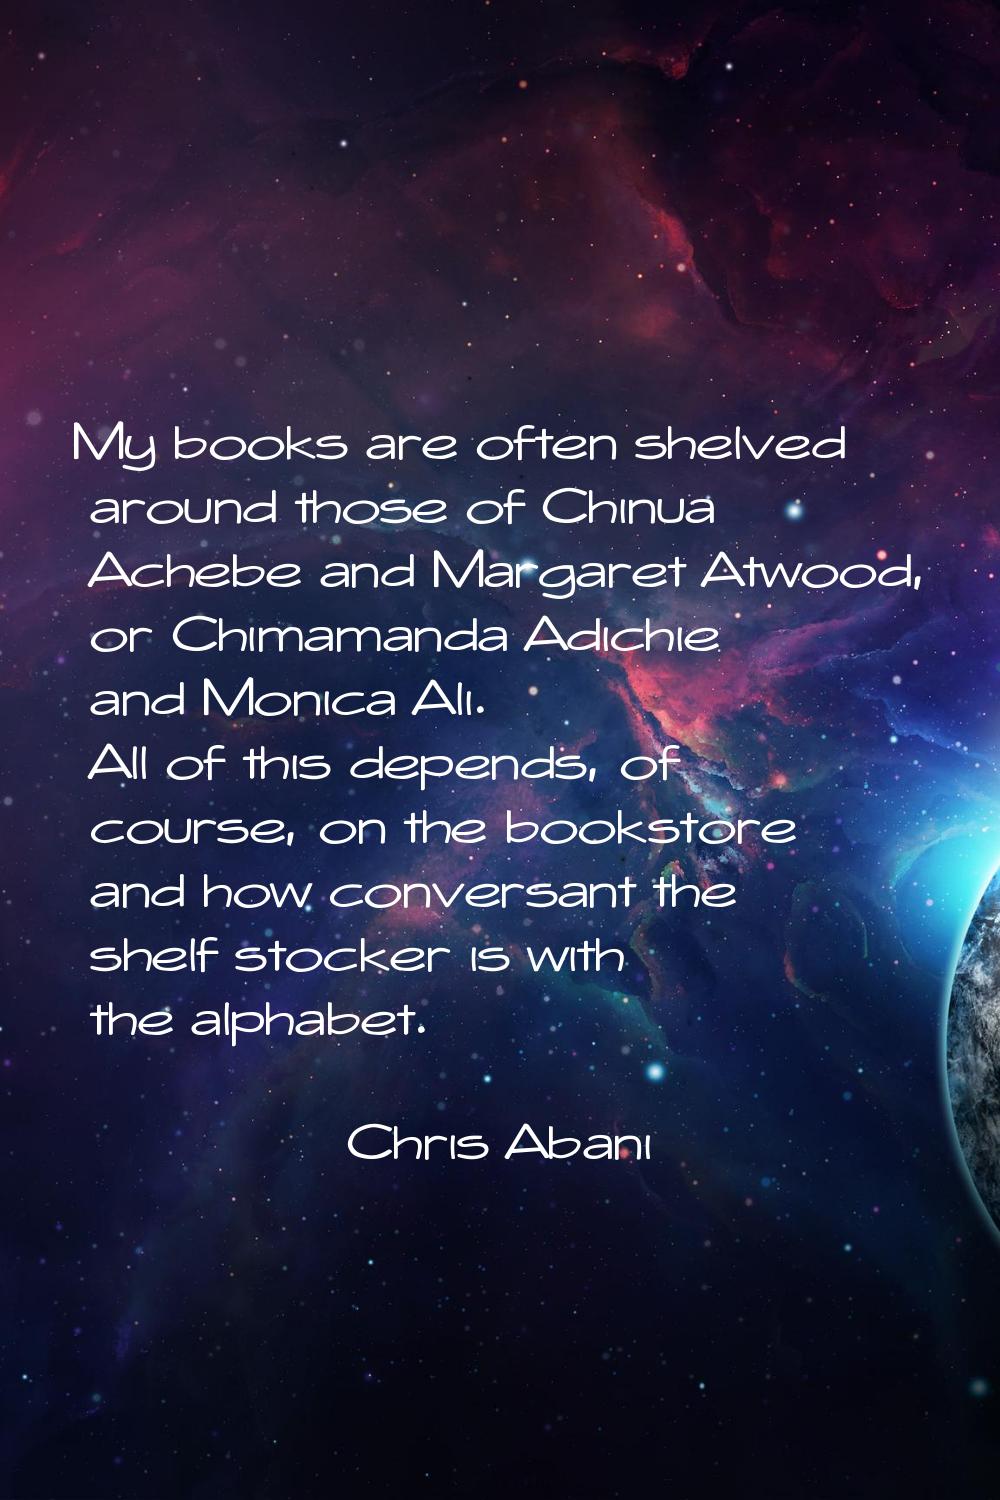 My books are often shelved around those of Chinua Achebe and Margaret Atwood, or Chimamanda Adichie